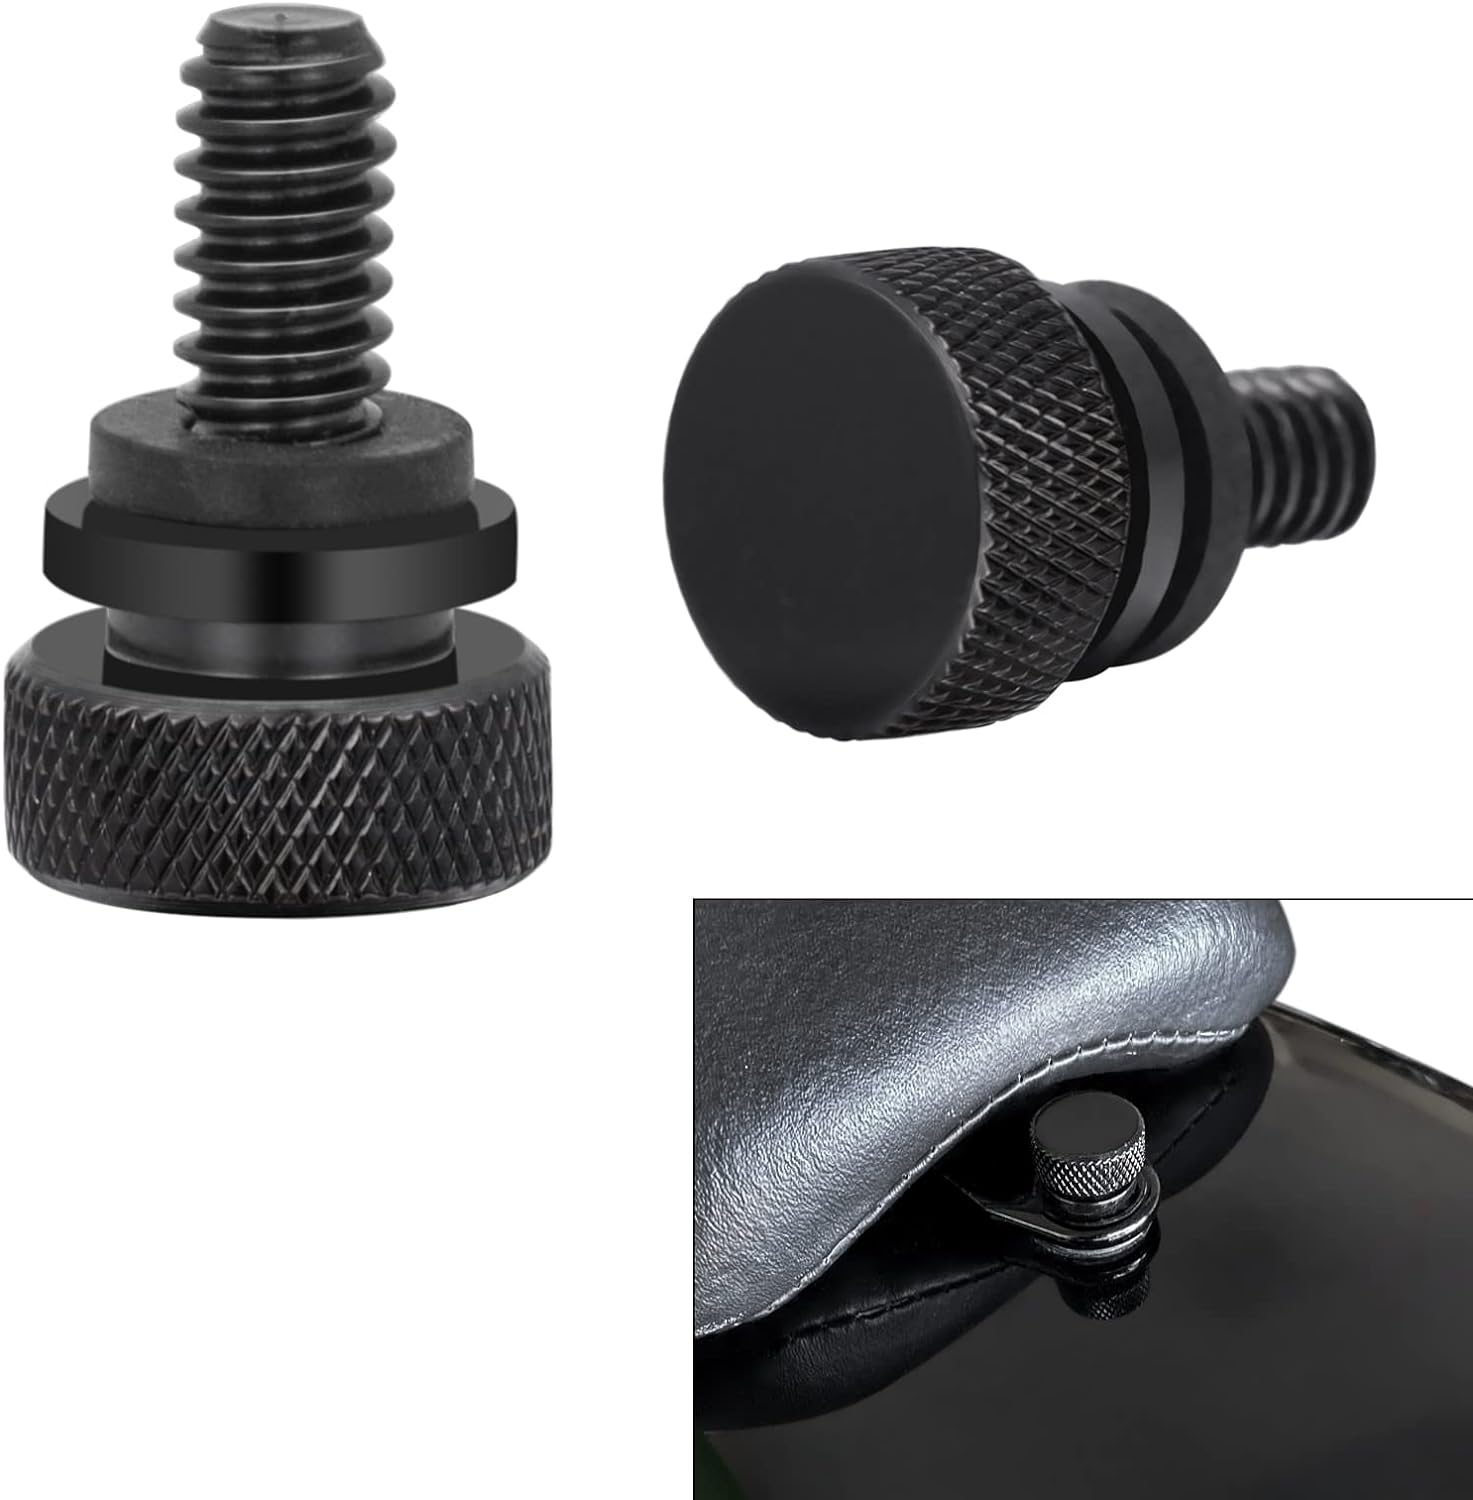 ANONEMOTO Black Seat Bolt Screw, Stainless Steel Rear Seat Screw Rear Mount Screw Quick Install Compatible for Harley Davidson 1996-2024 Sportster Softail Dyna Street Glide Road Glide Road King 2 Pcs - ANONEMOTO Black Seat Bolt Screw Review